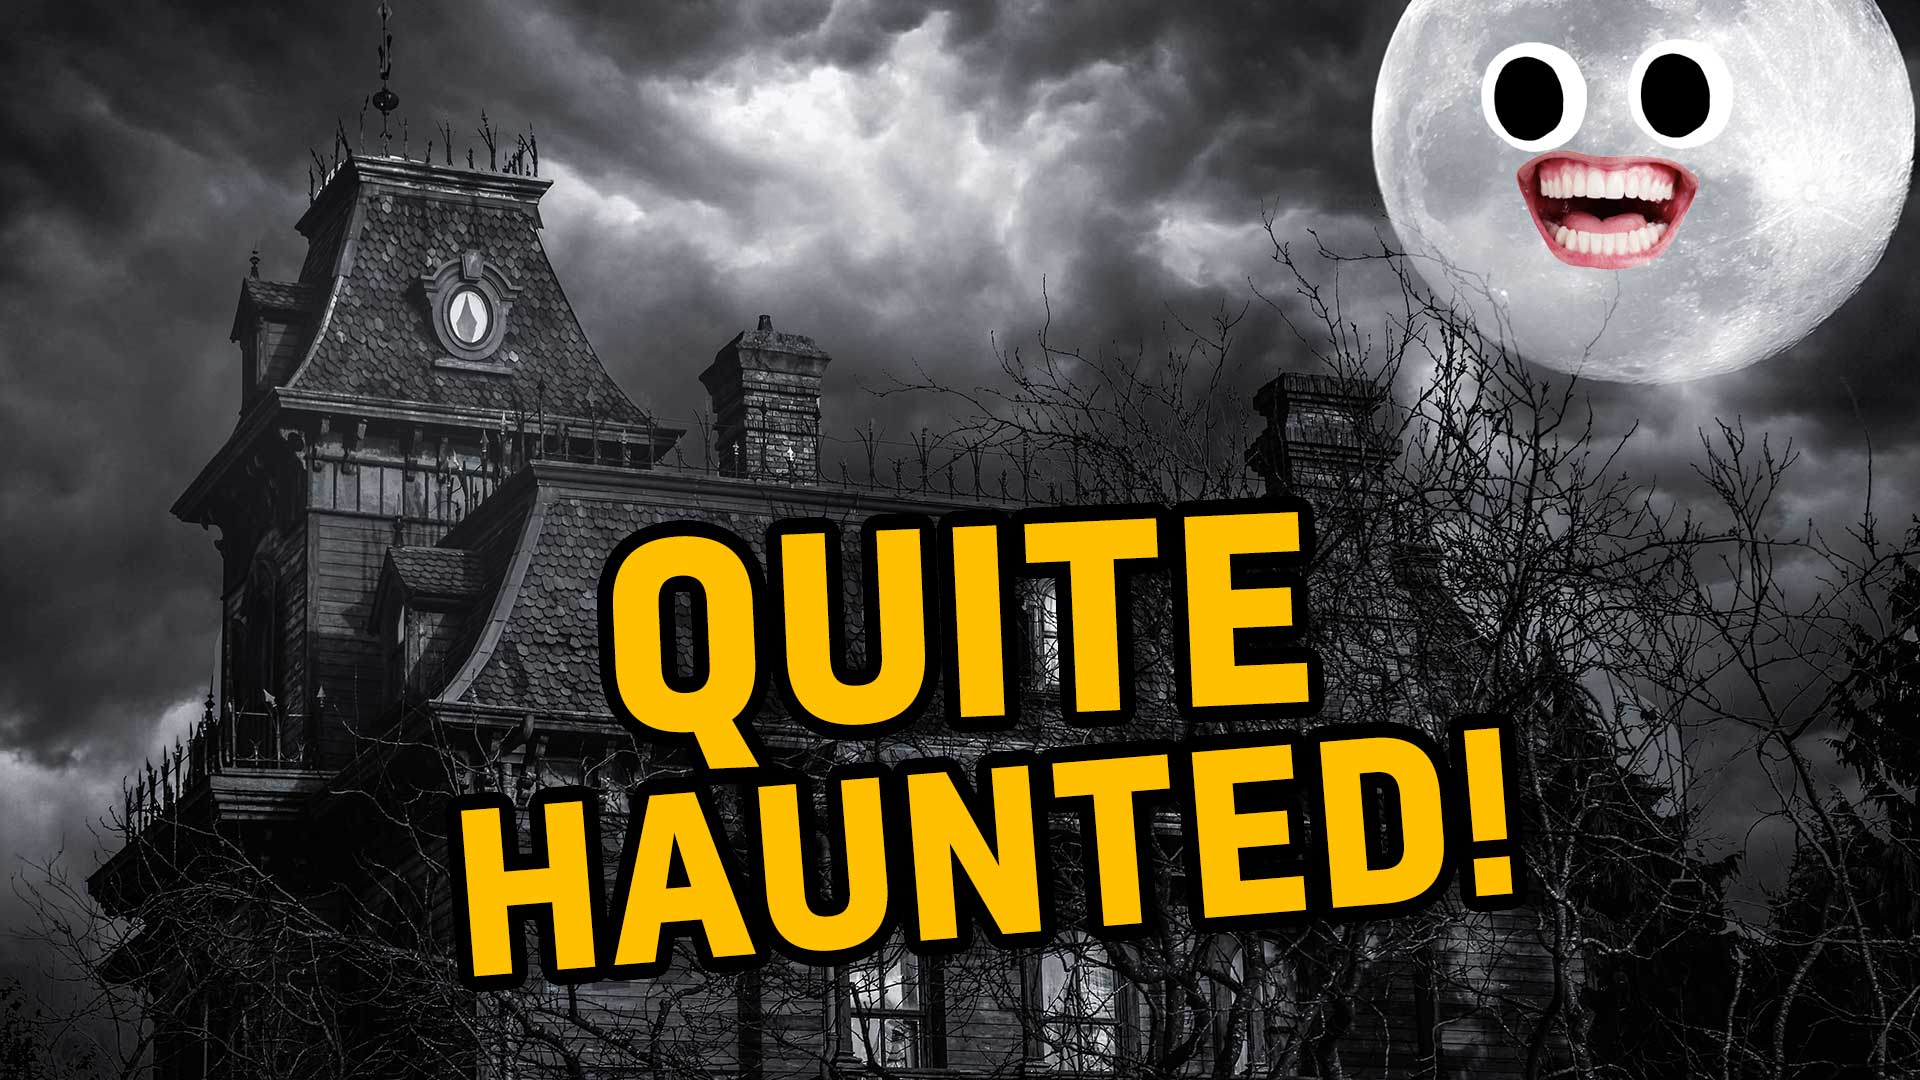 Your house is: QUITE HAUNTED!